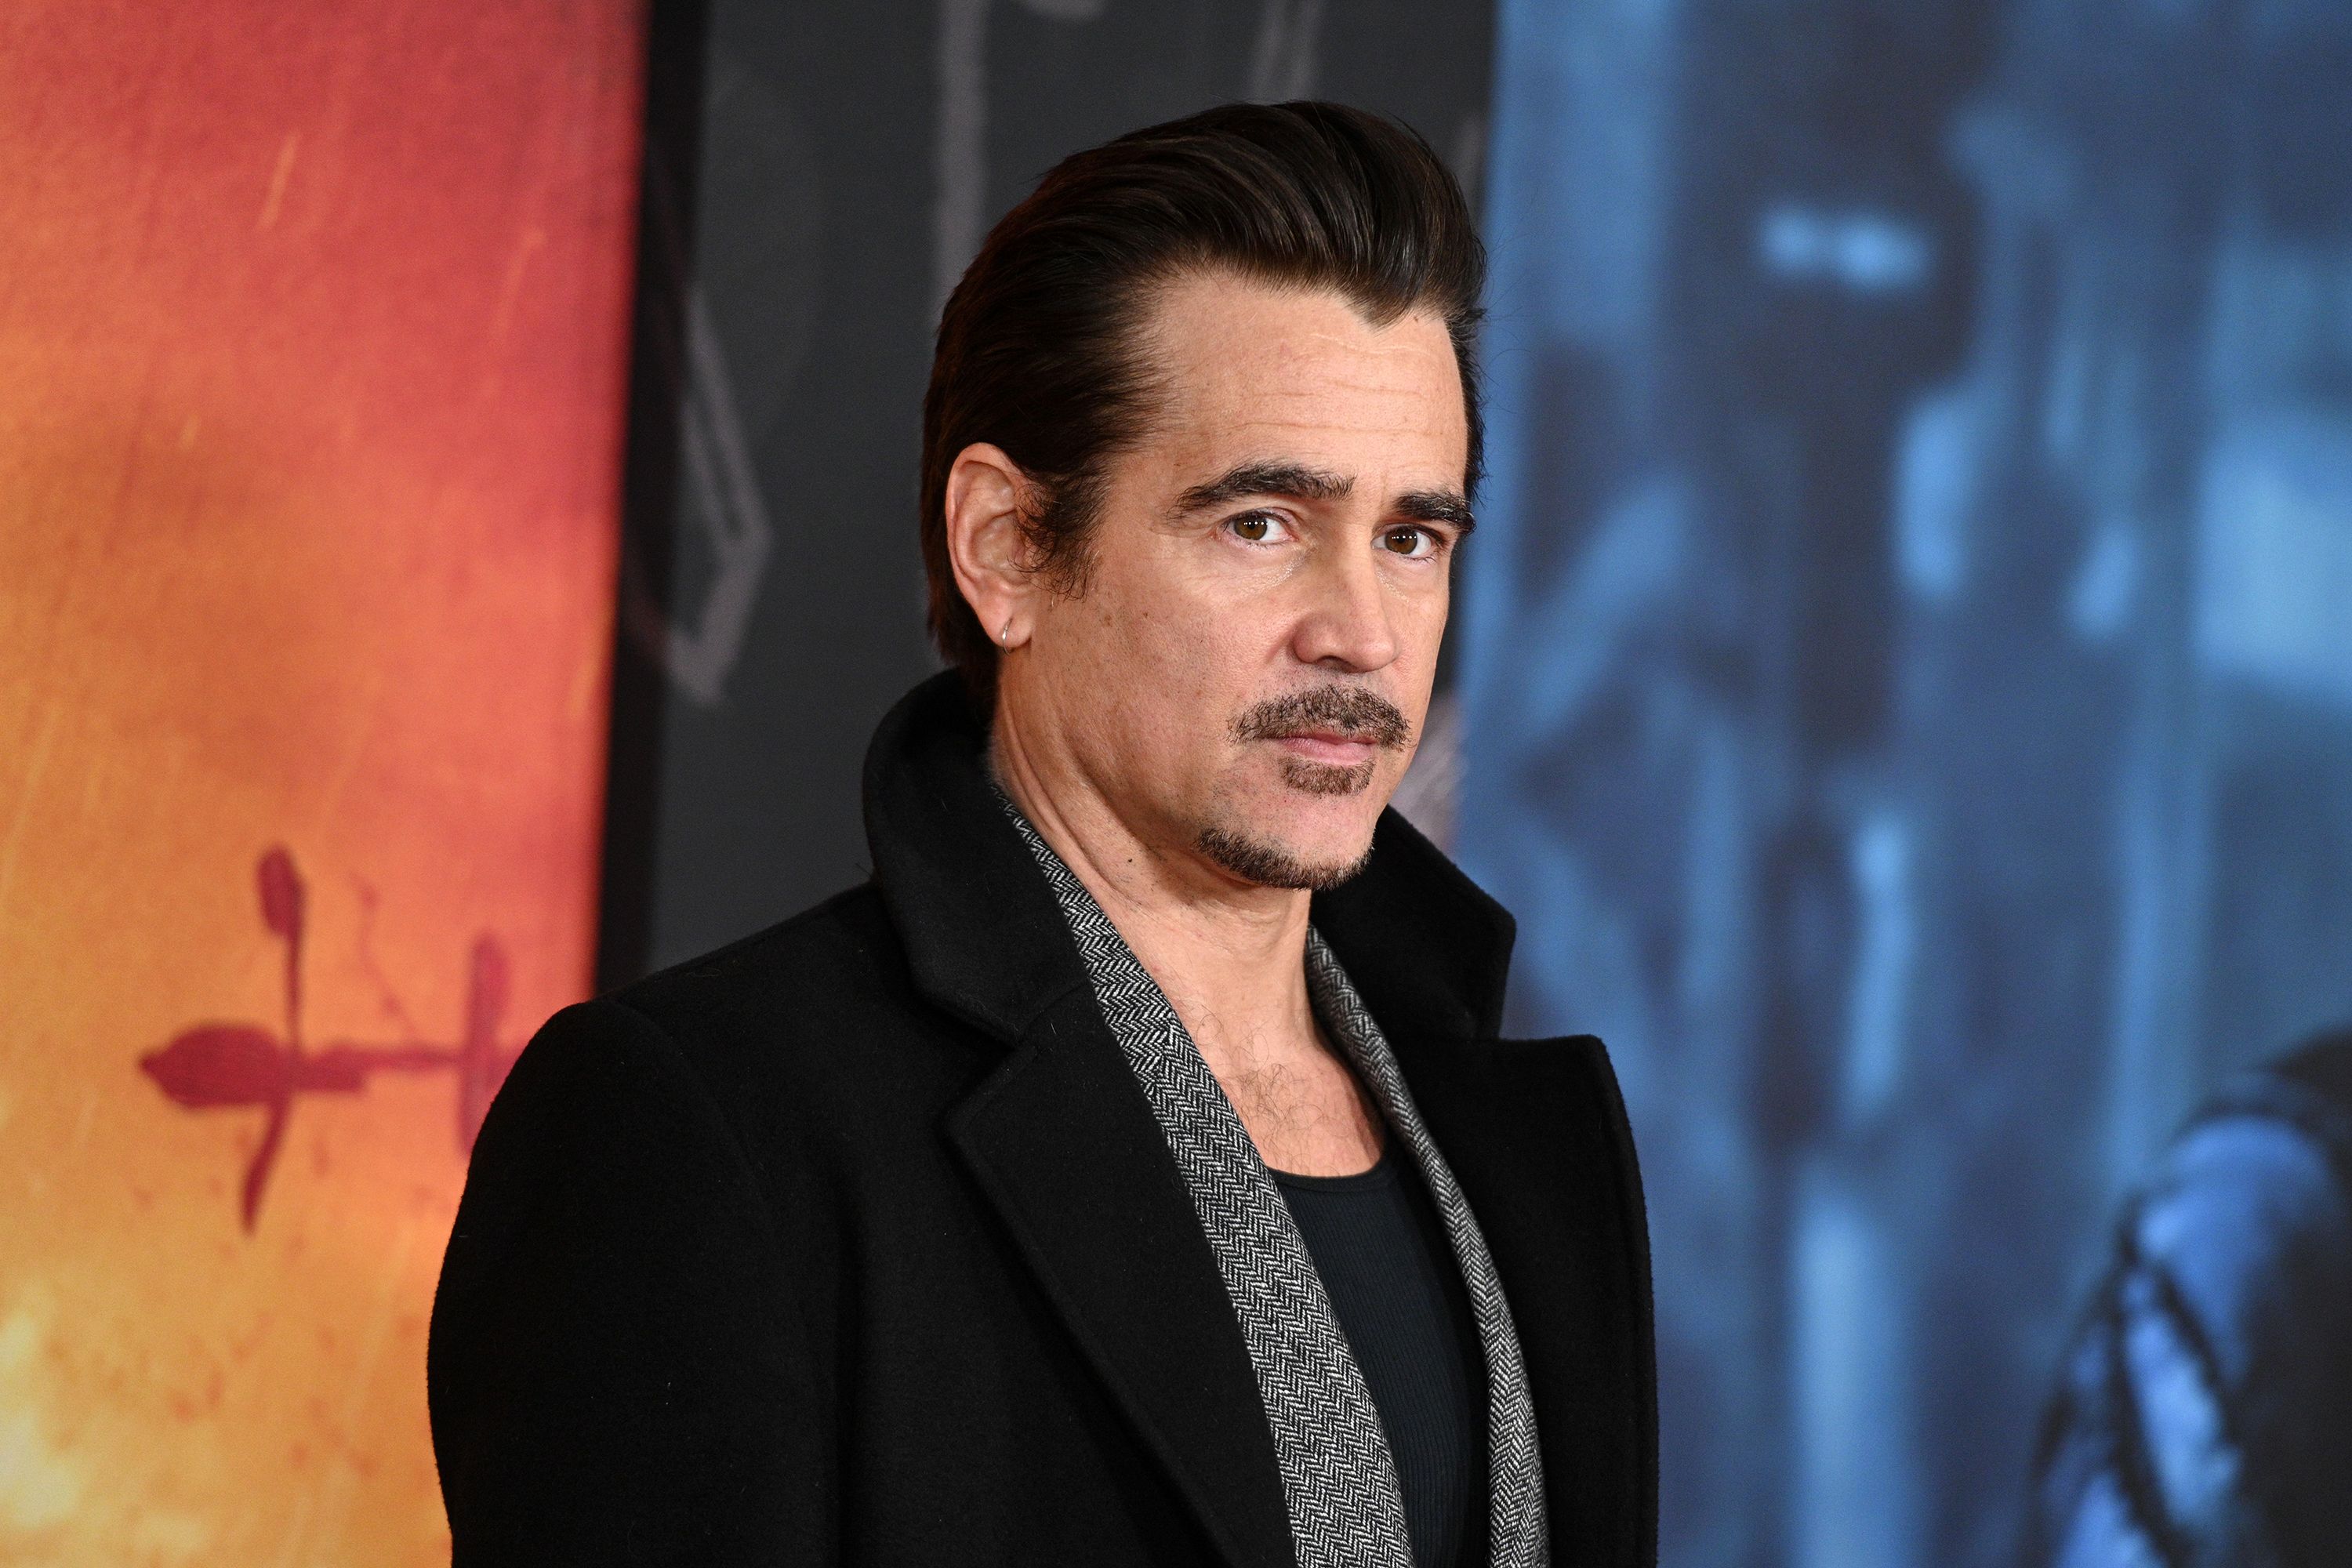 Who Is Colin Farrell’s Wife? Details Inside!